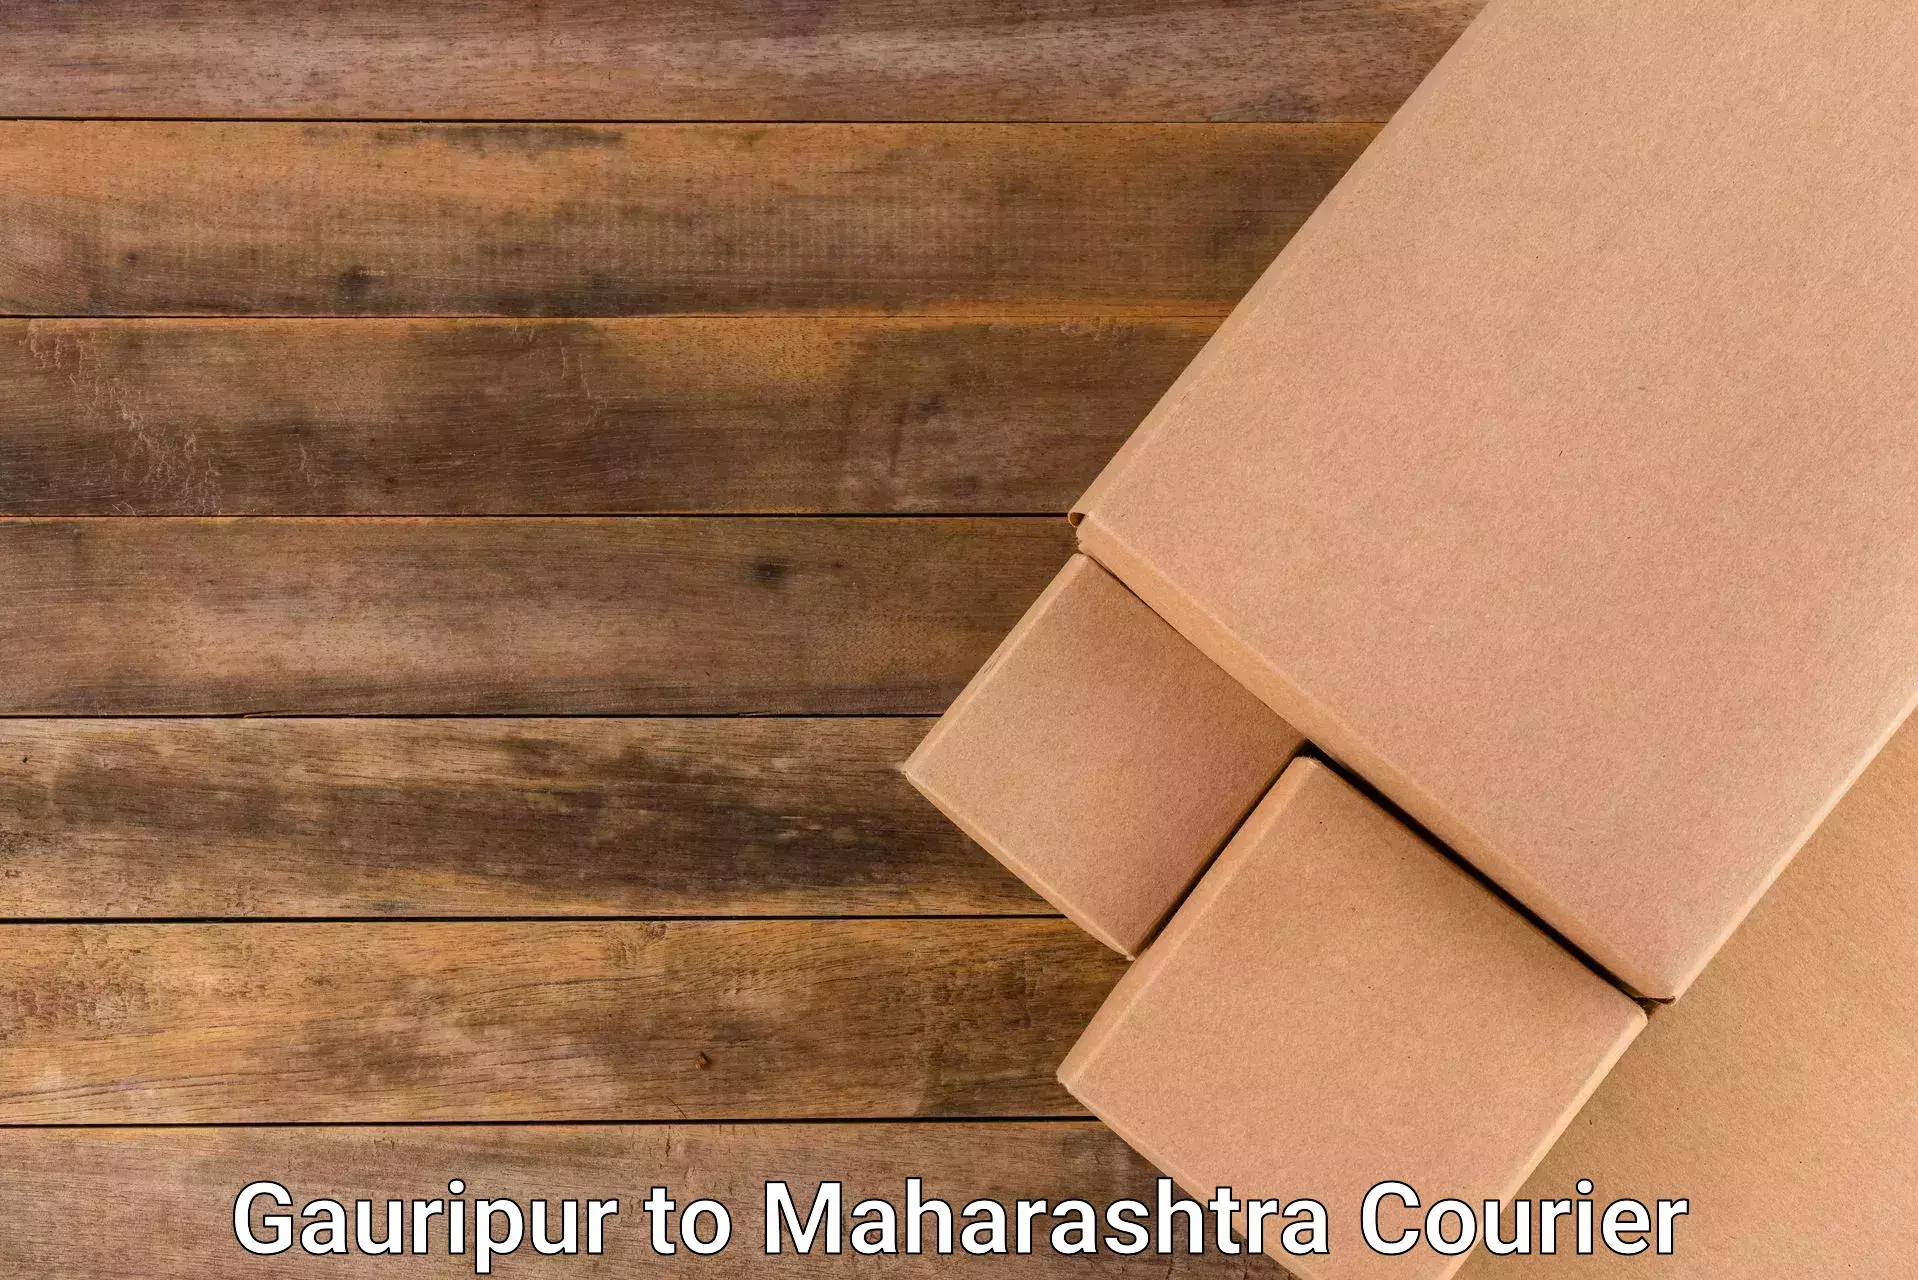 Global shipping solutions Gauripur to Vasai